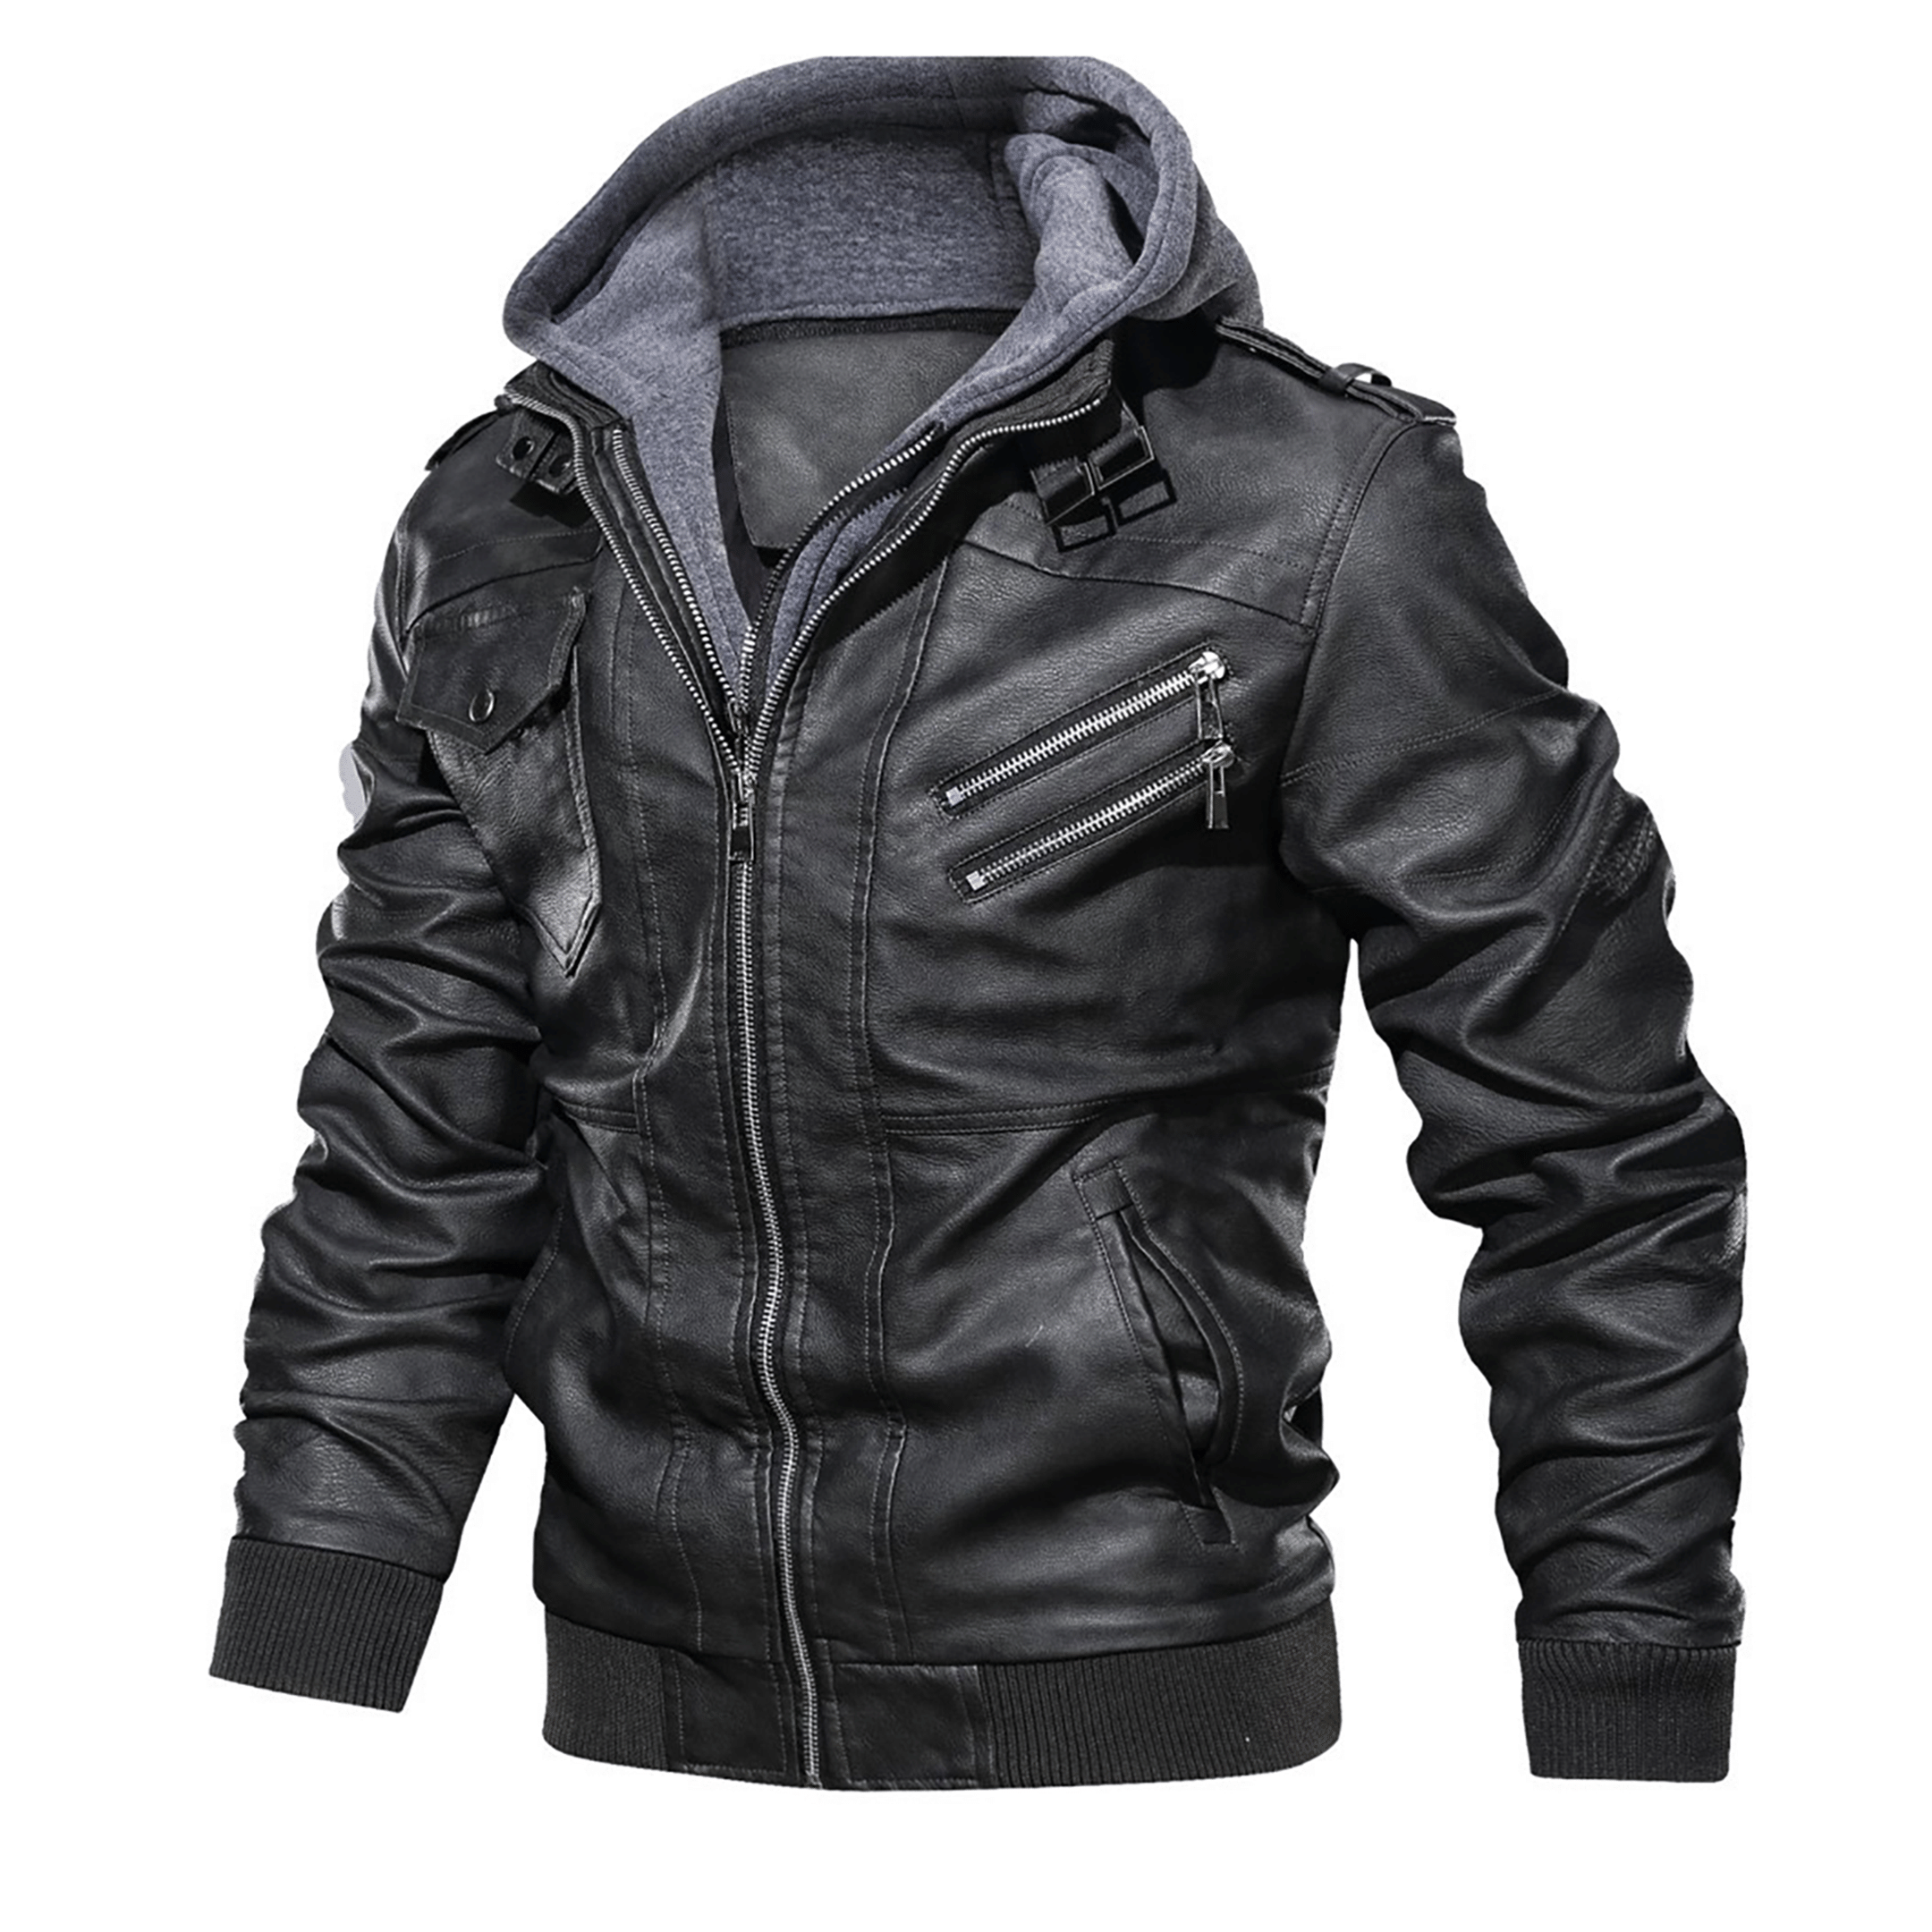 Top leather jackets and latest products 119